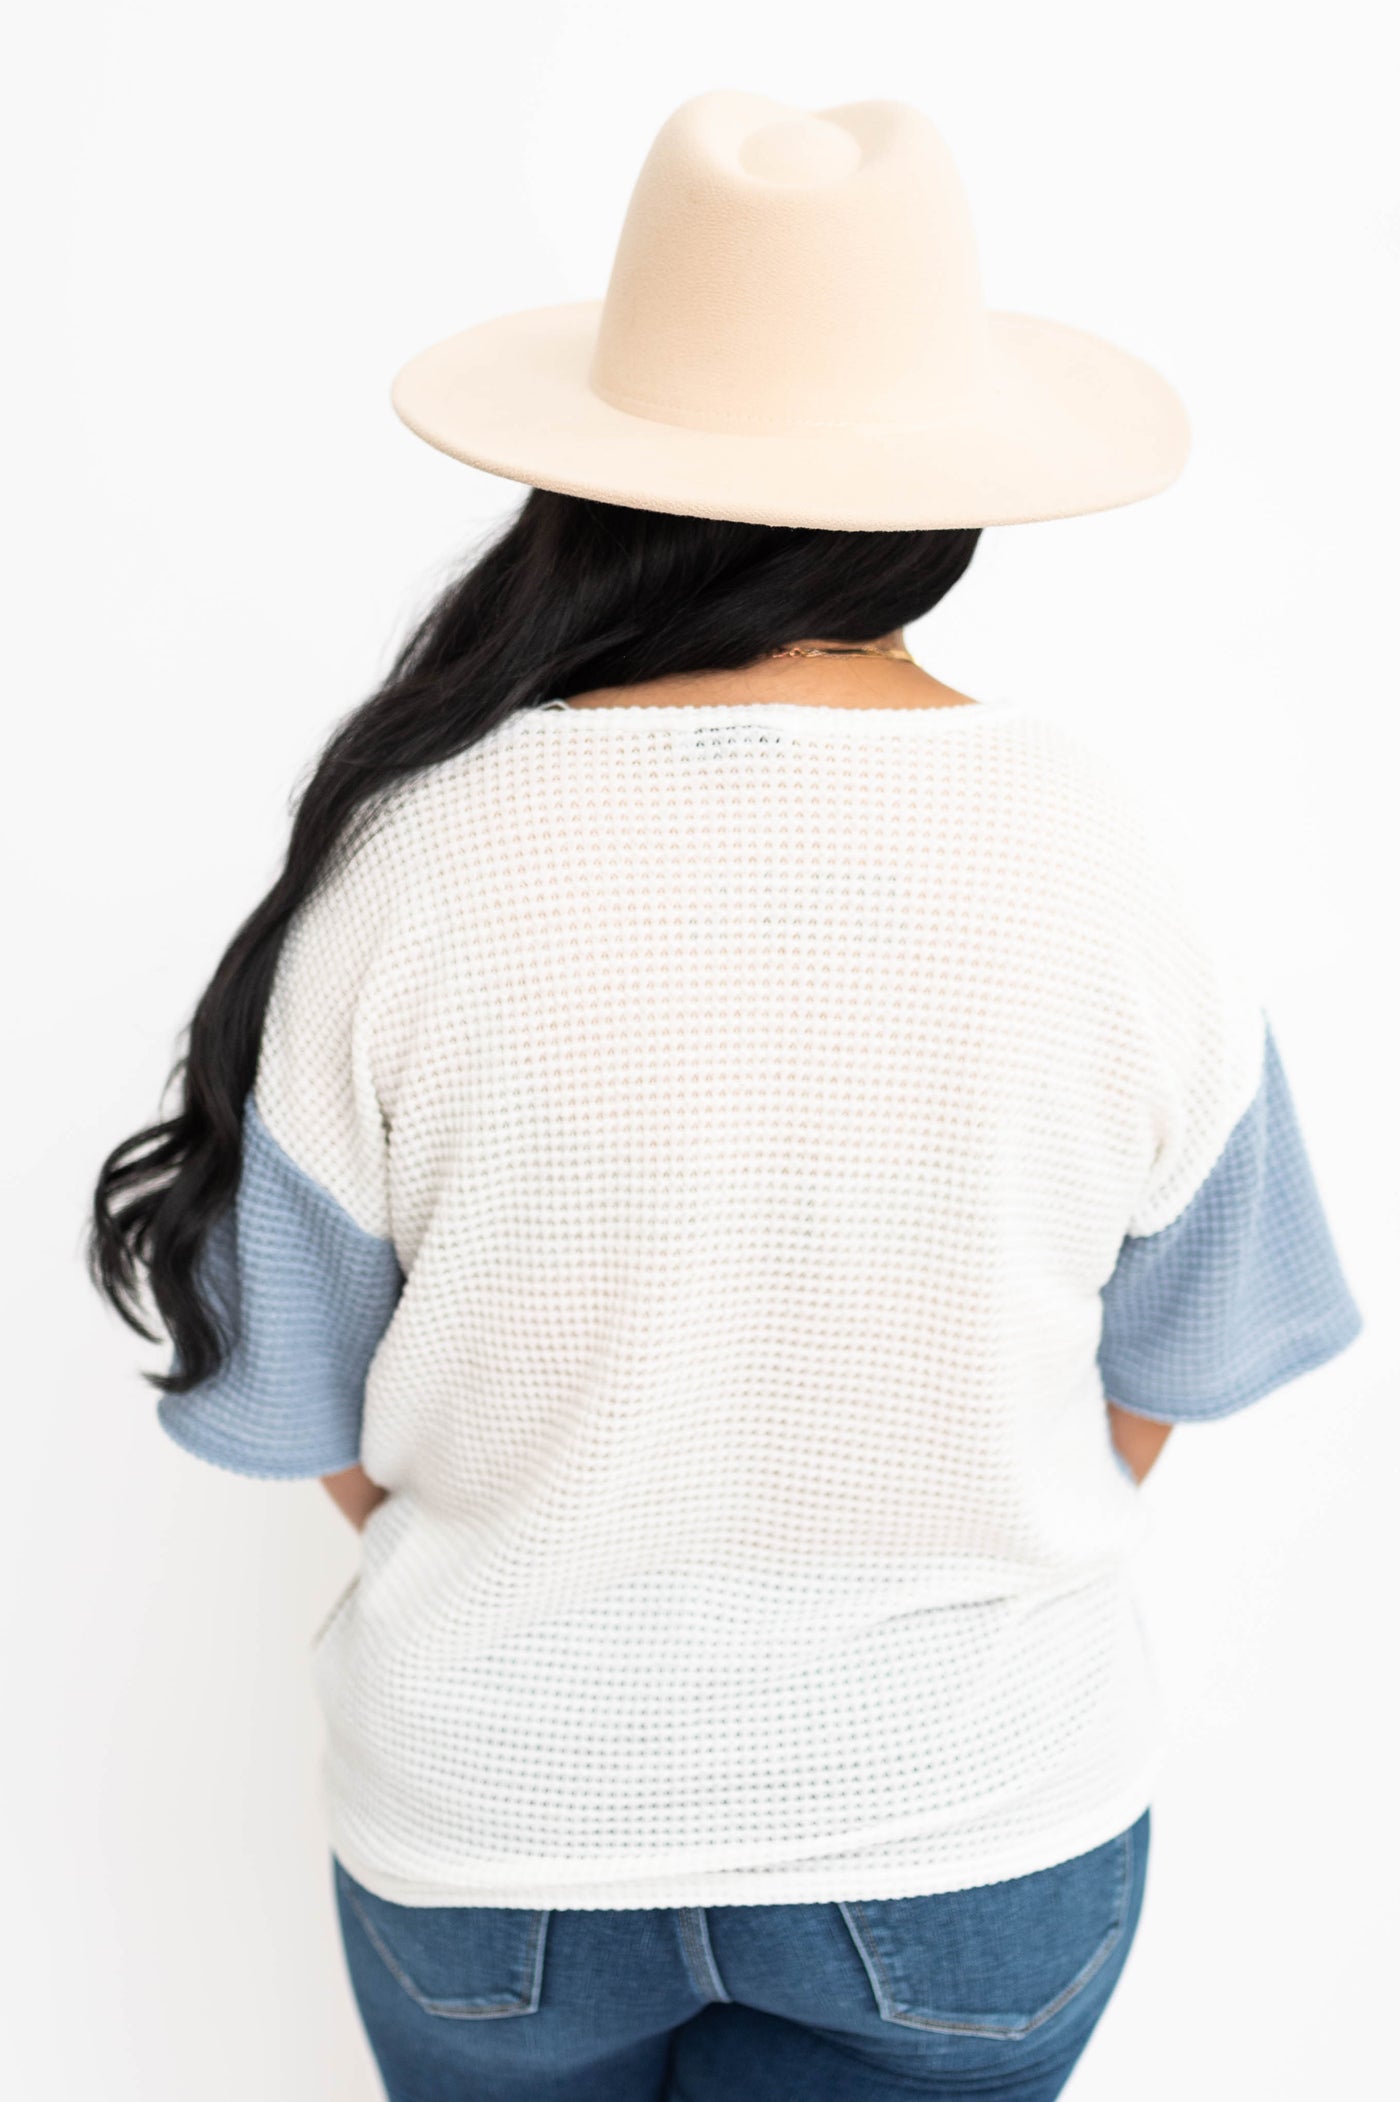  Back view of a blue knit top